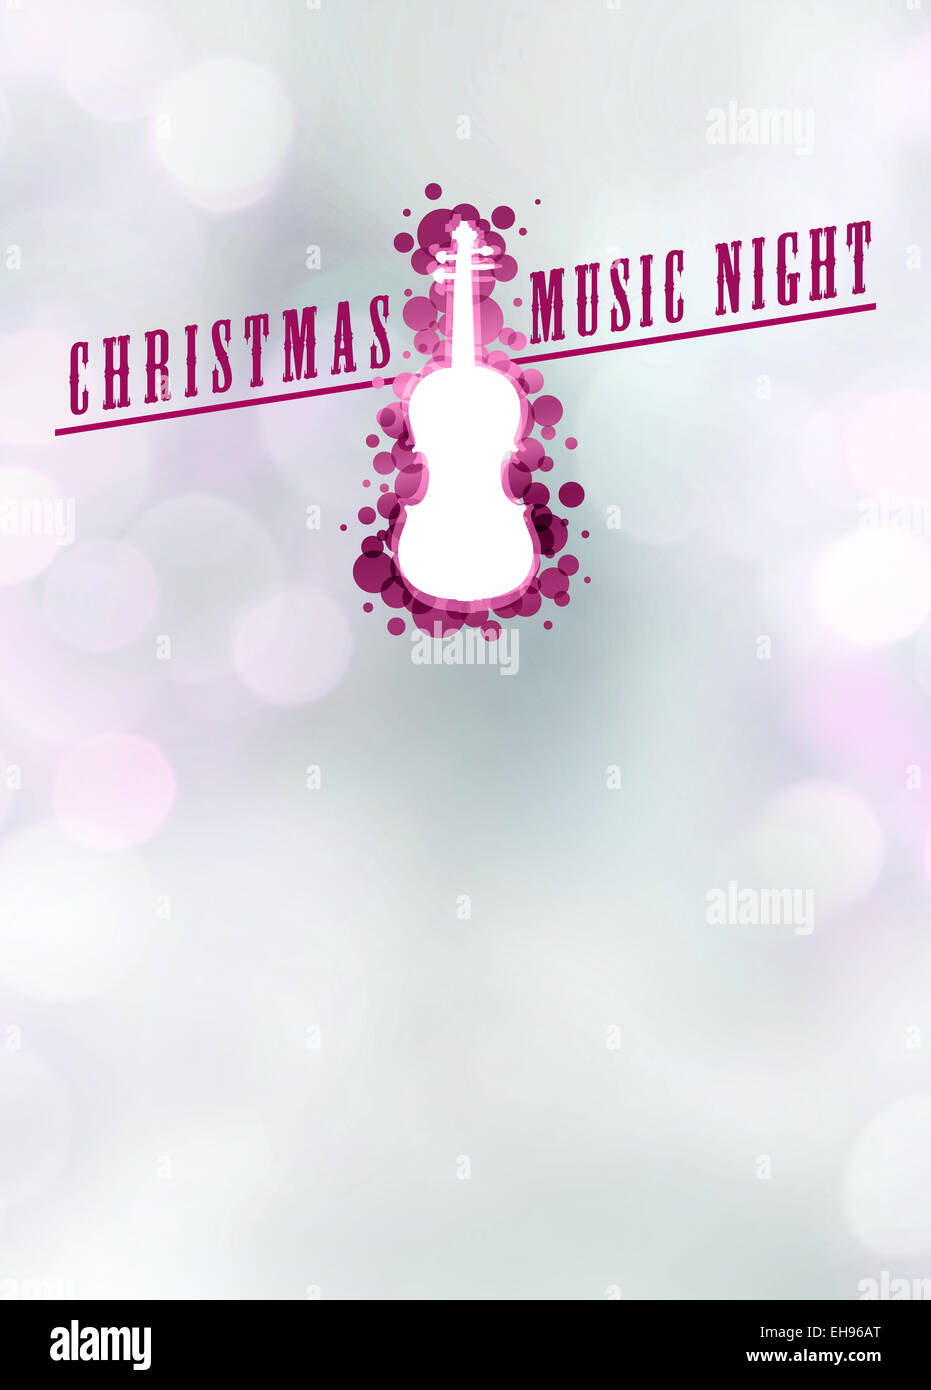 Advent or christmas concert invitation poster or flyer background with empty space Stock Photo